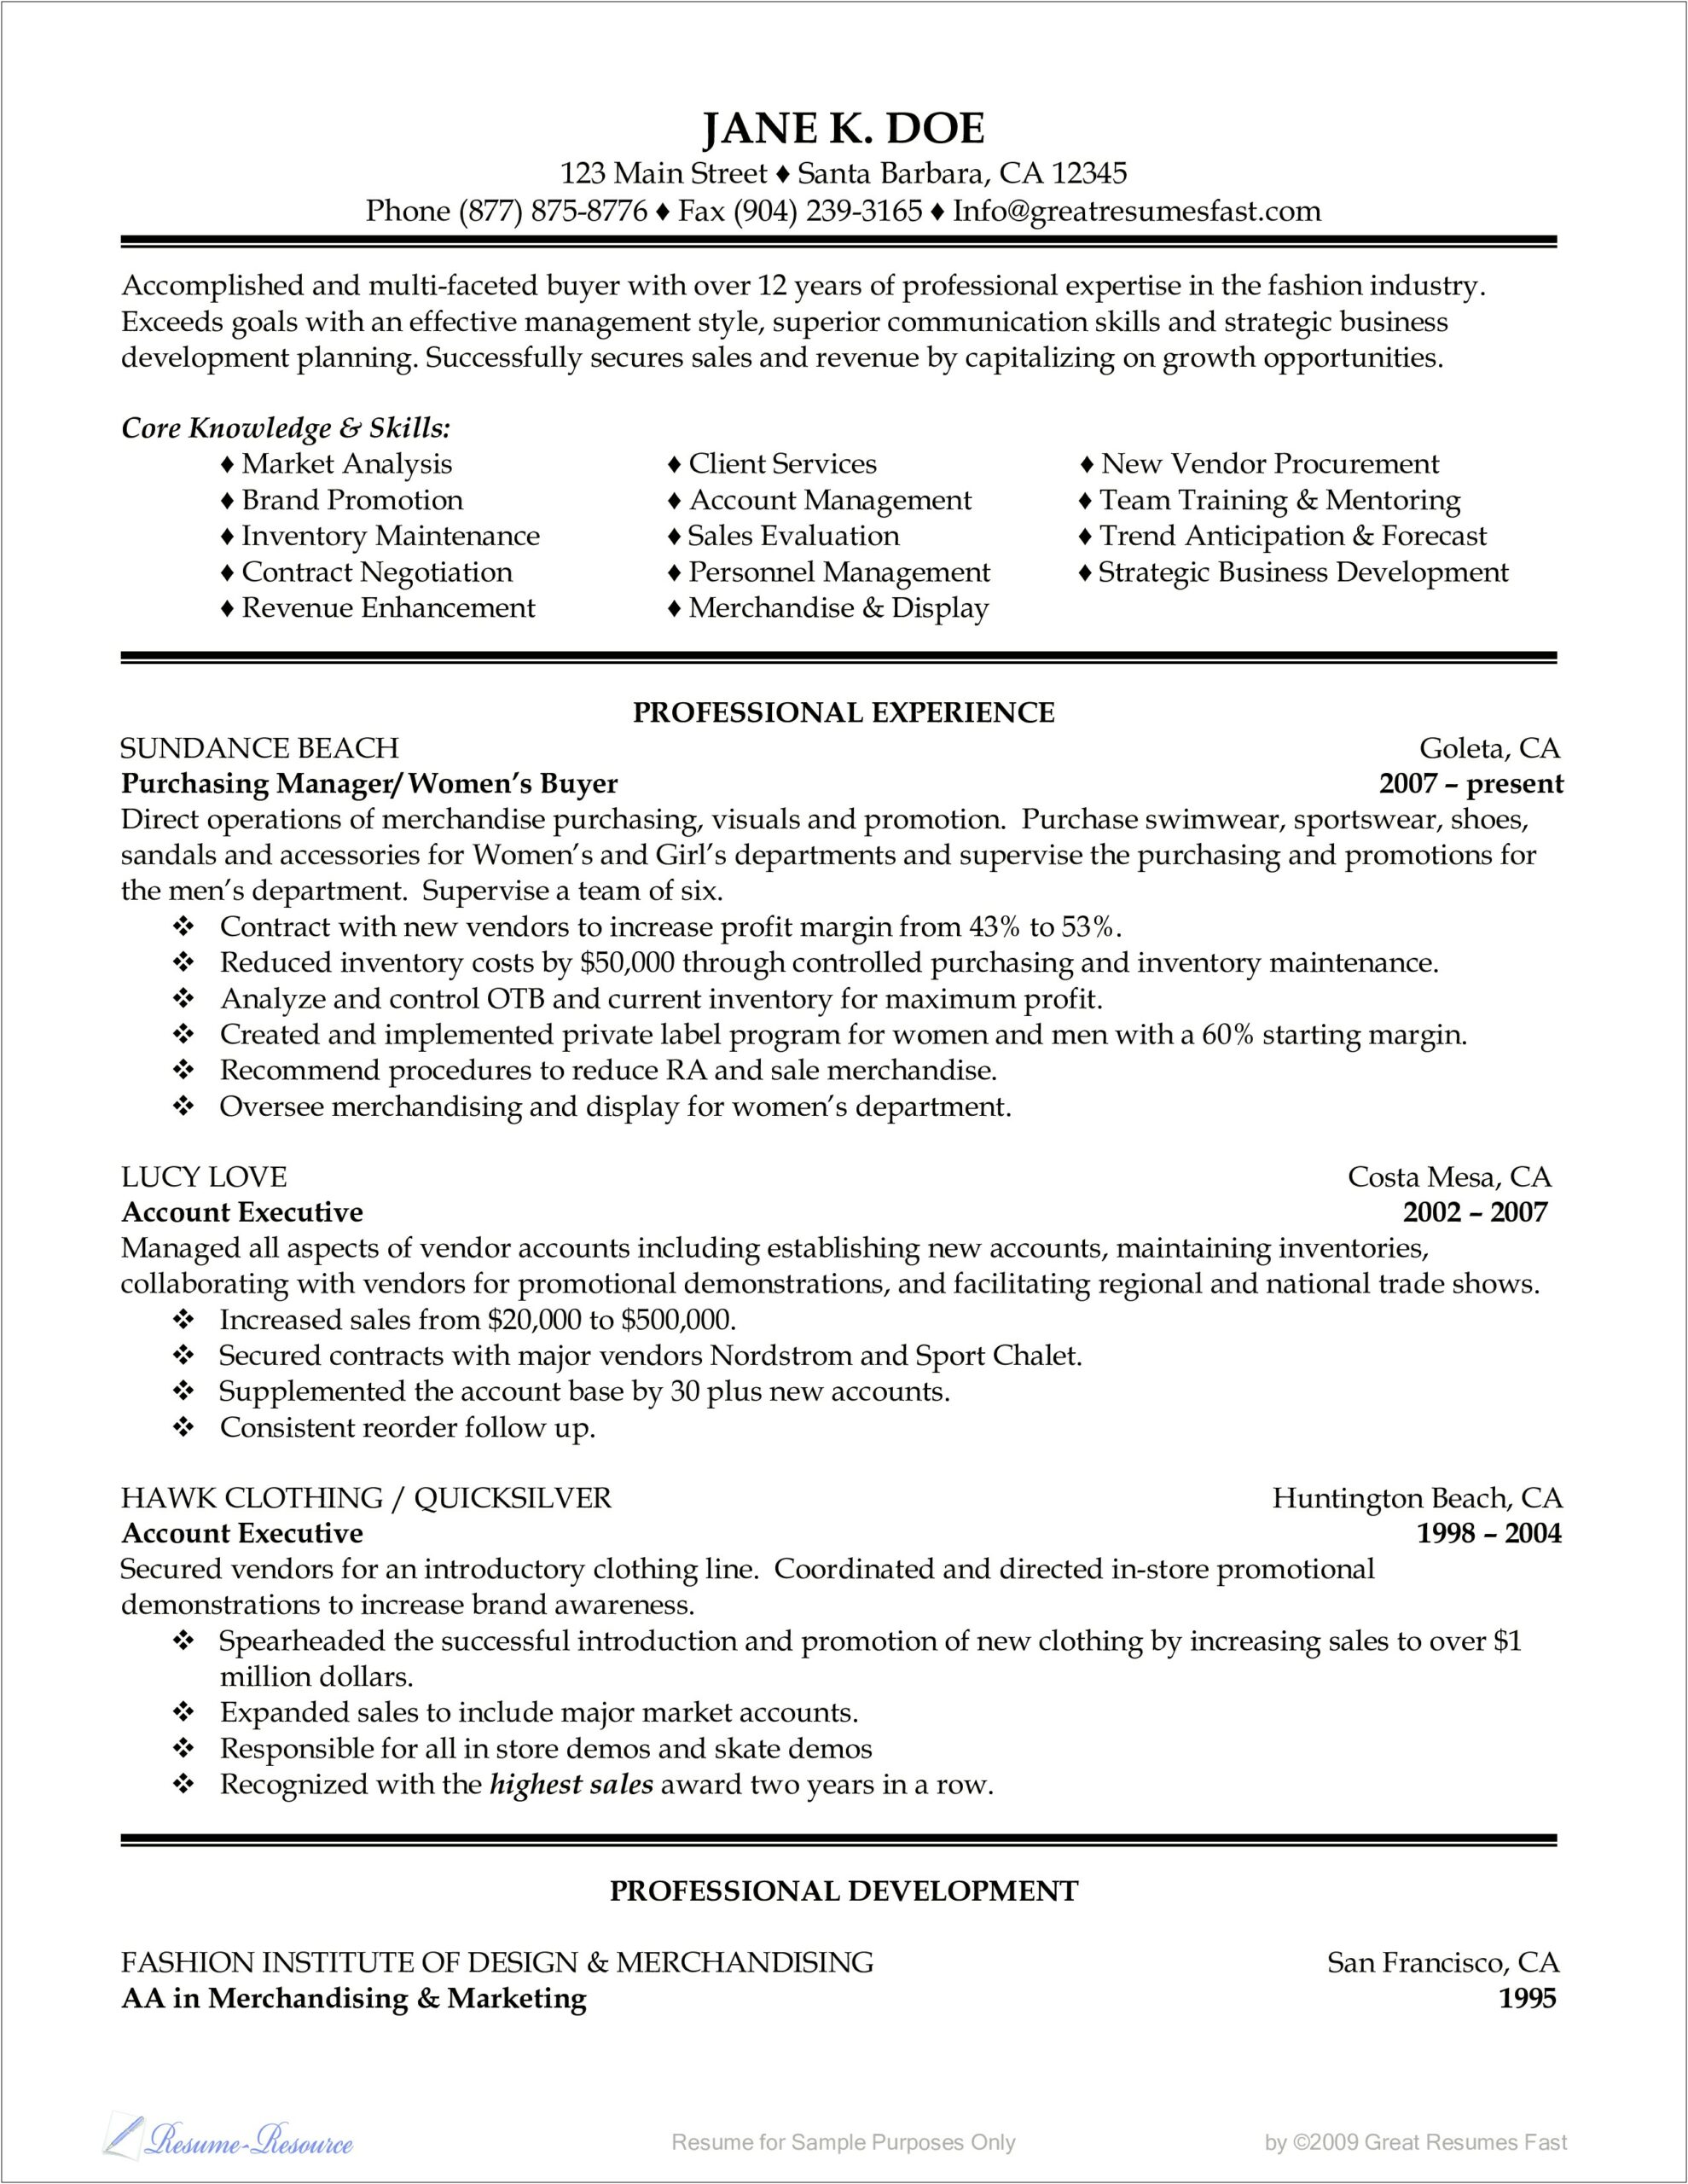 Professional Resume Geared Towards Management Position